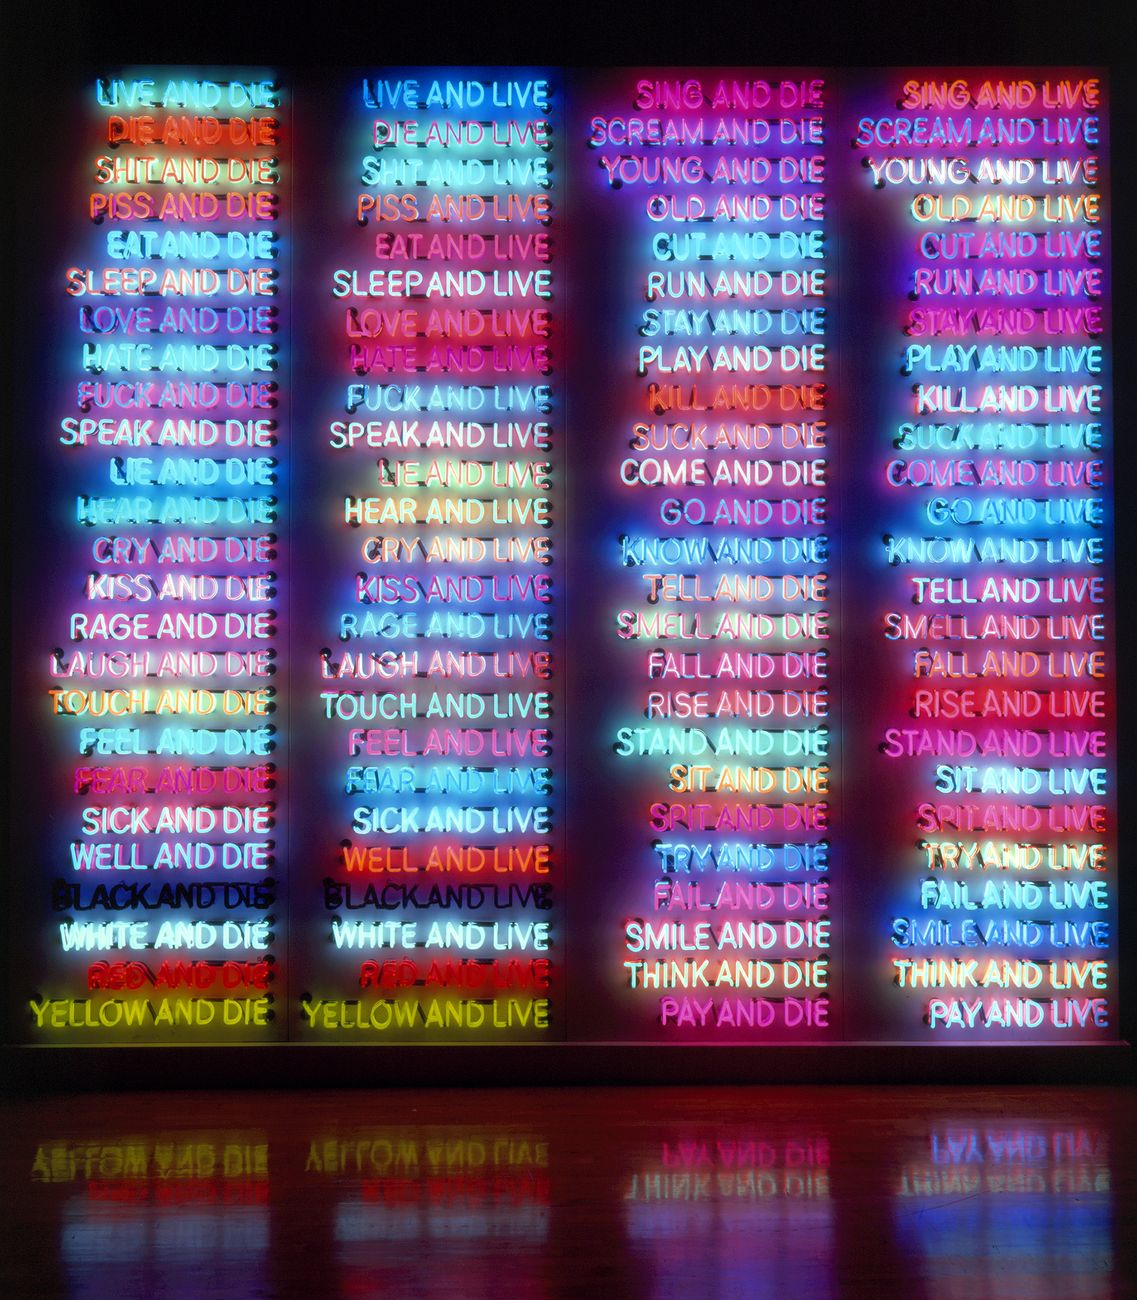 Bruce Nauman, One Hundred Live and Die, 1984. Collection Benesse Holdings, Inc. - Benesse House Museum, Naoshima. Photo Dorothy Zeidman, Courtesy the artist & Sperone Westwater, New York © Bruce Nauman - 2018, ProLitteris, Zurich